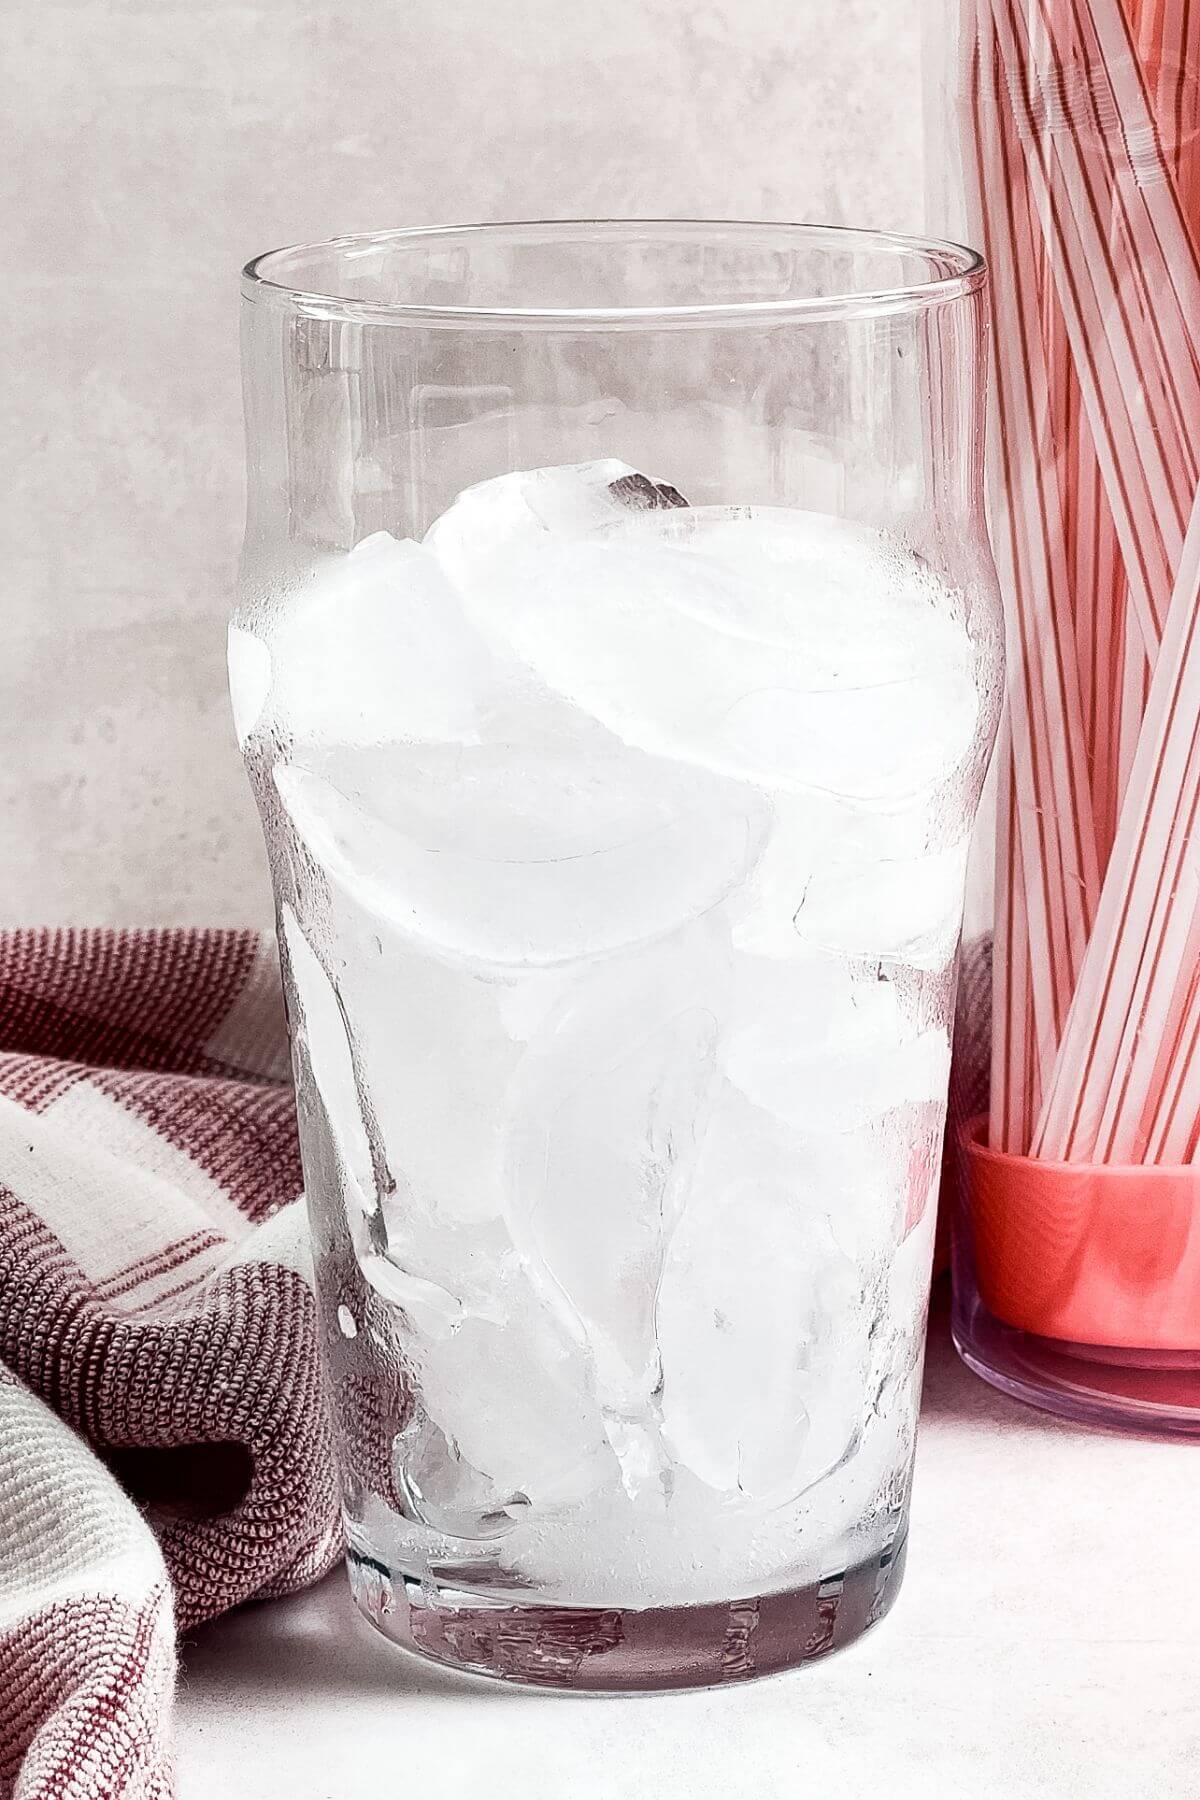 Tall glass filled with ice.